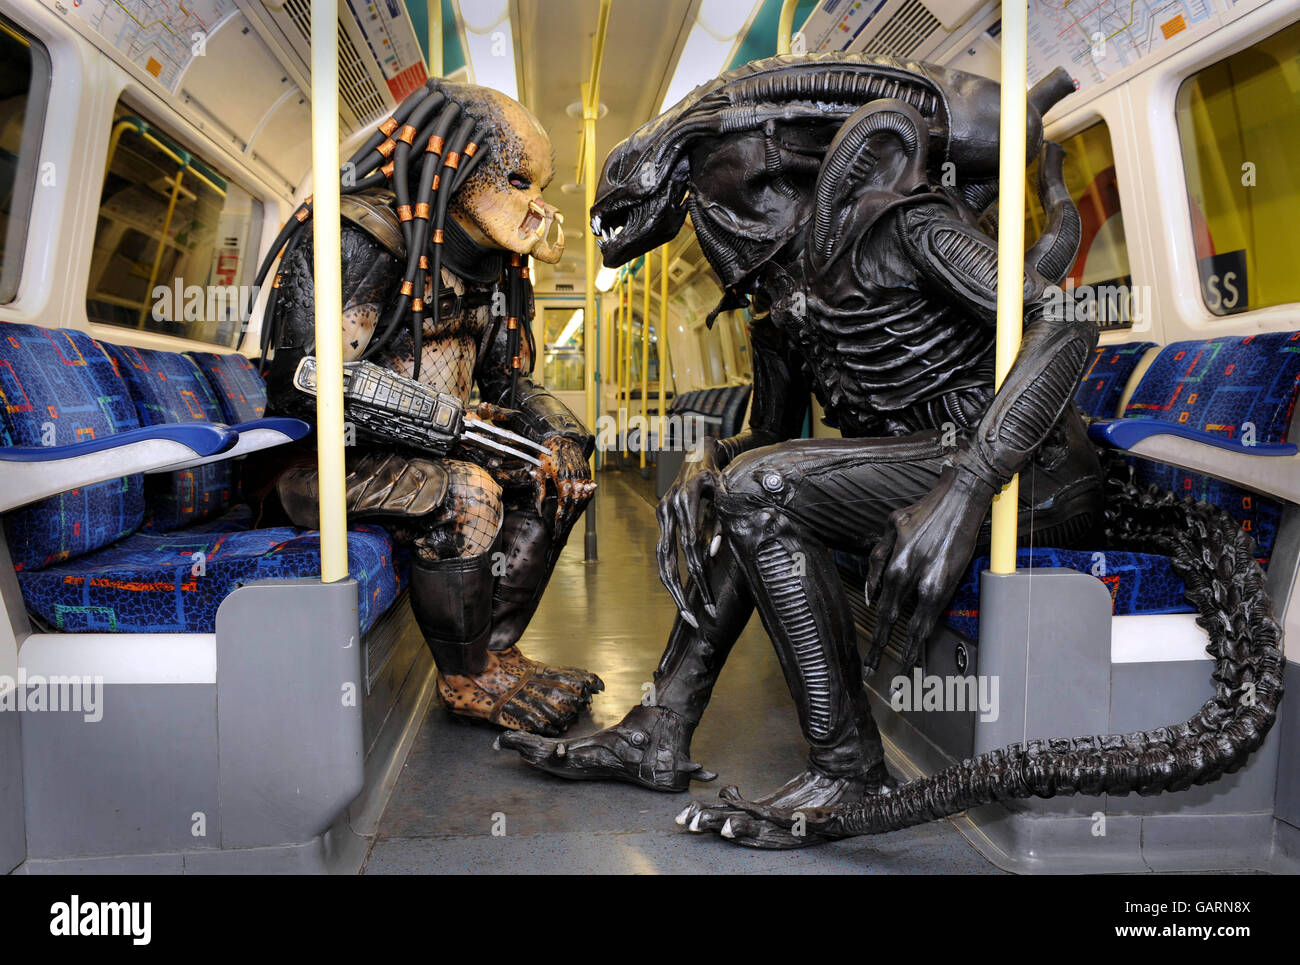 Alien and Predator costume characters spend the day as tourists exploring  London ahead of the launch of Alien vs. Predator 2: Requiem Stock Photo -  Alamy